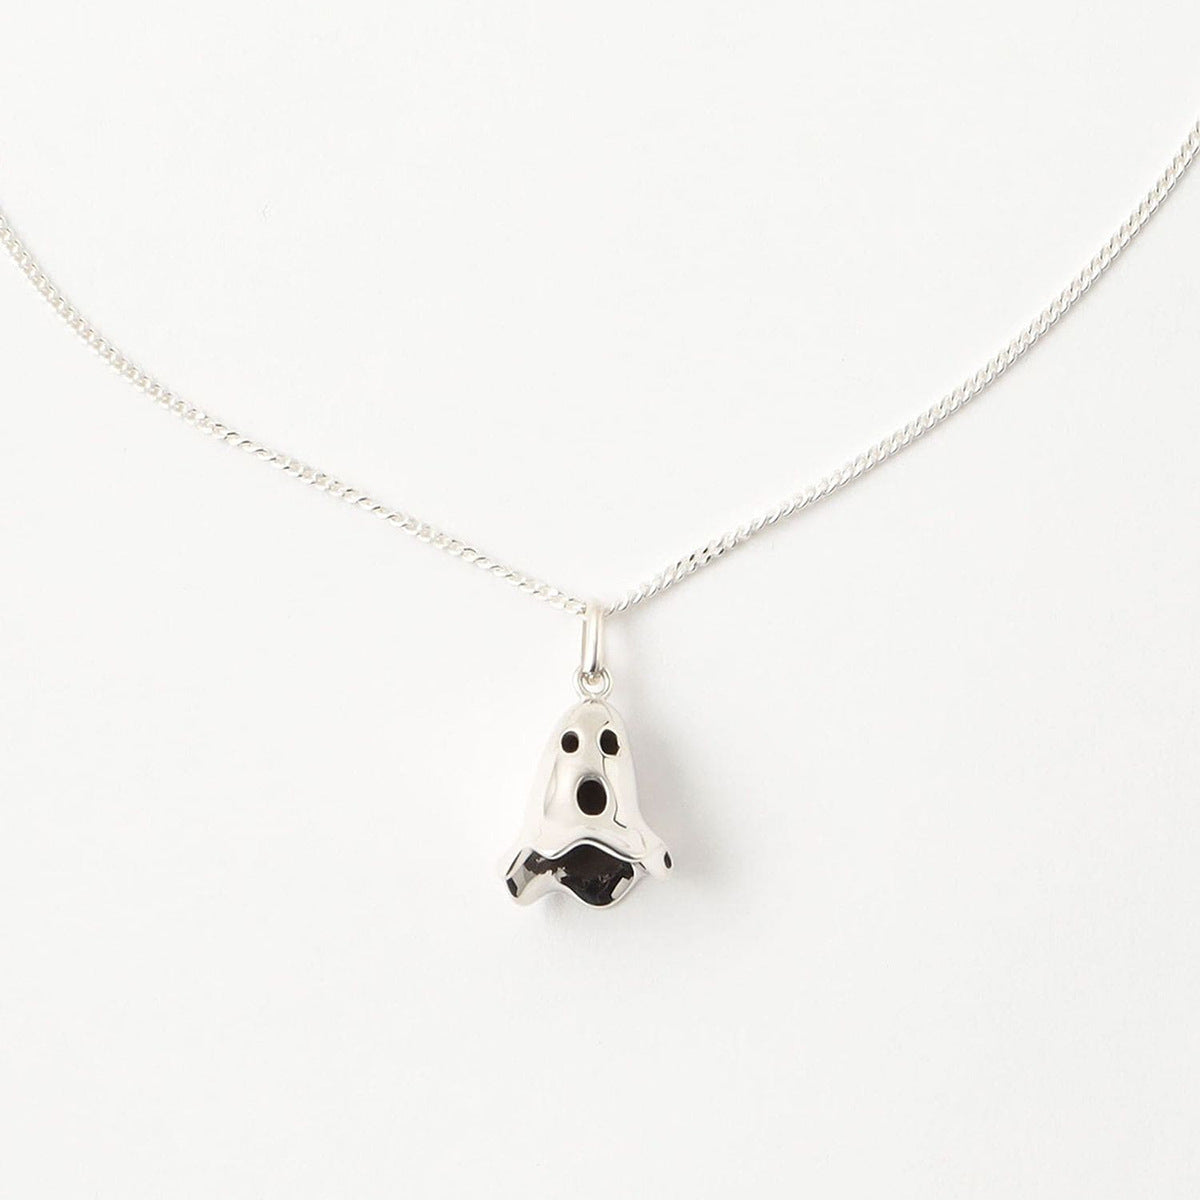 A Halloween Cartoon Ghost Pendant Necklace on a chain by Maramalive™.